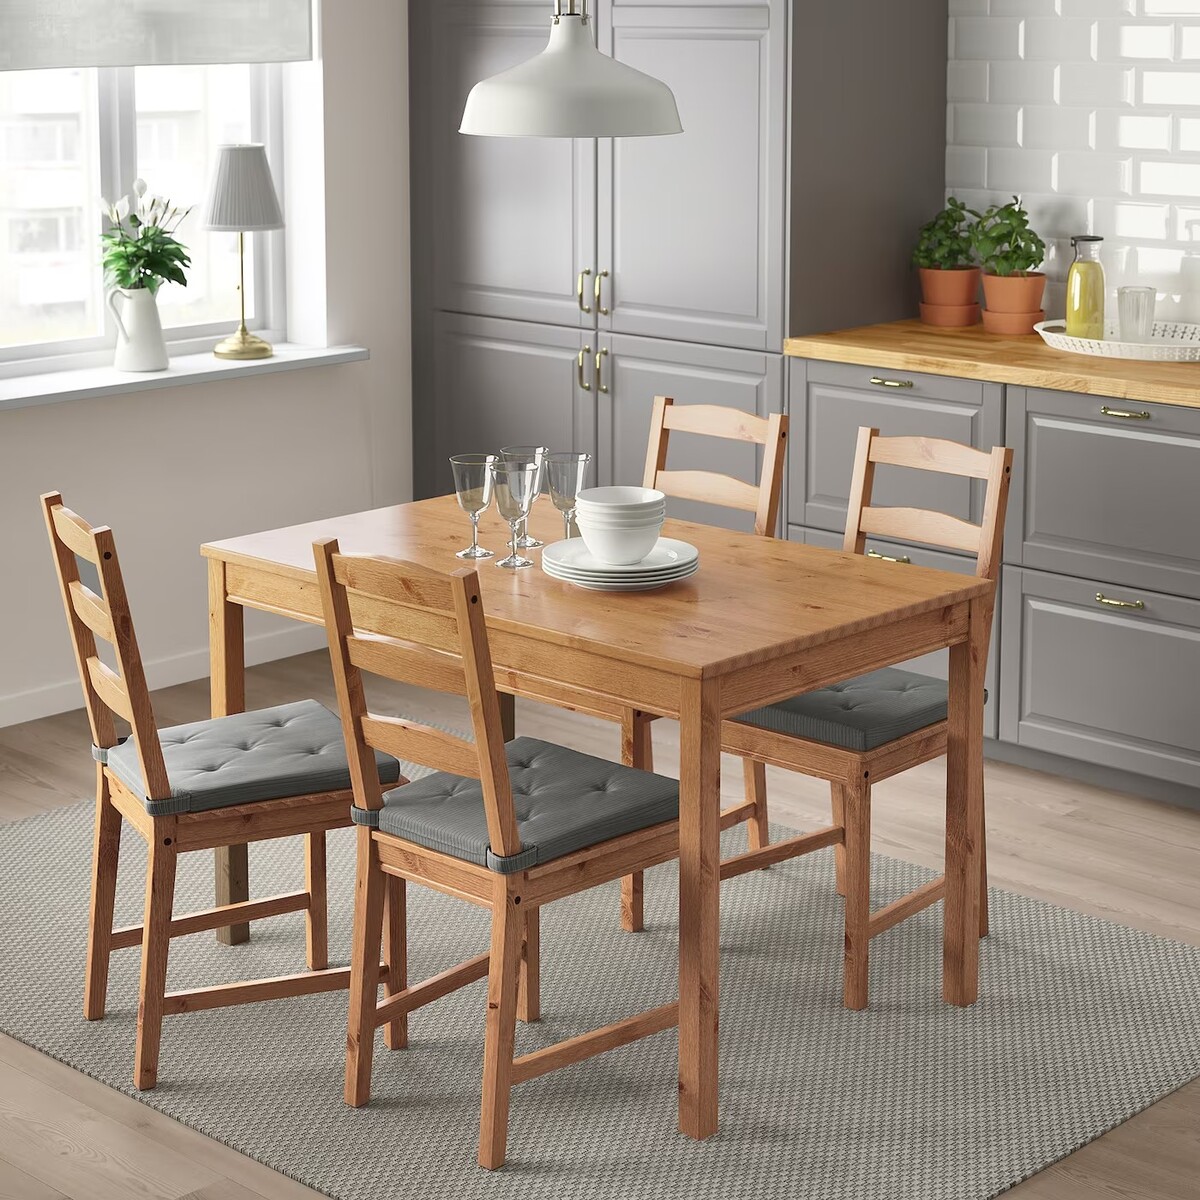 JOKKMOKK Table and 4 chairs from IKEA